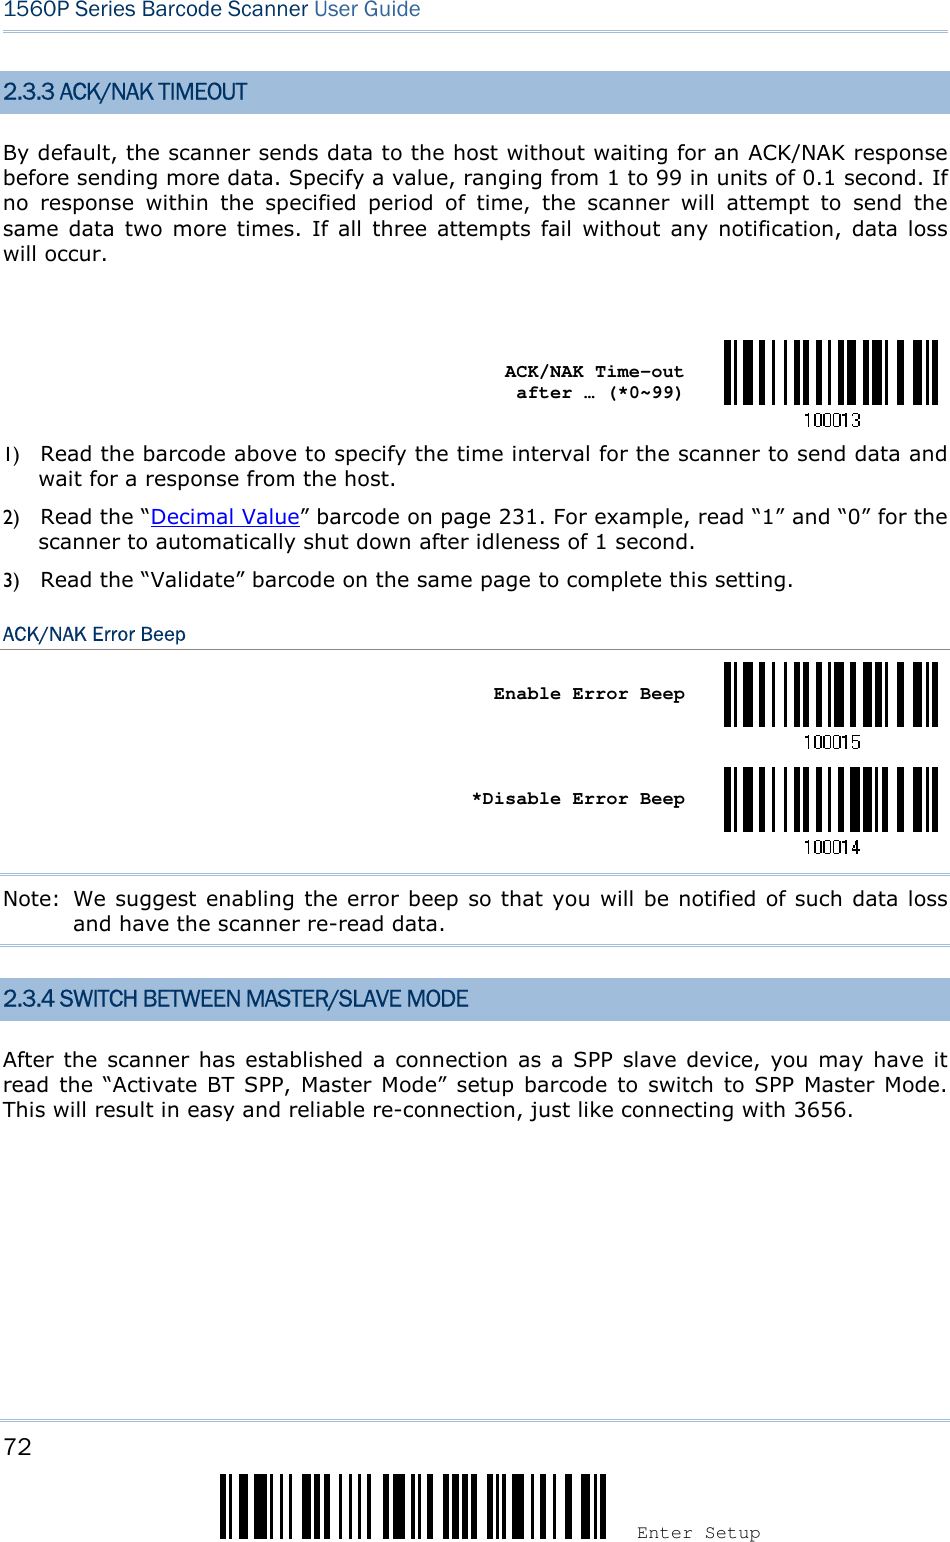 72 Enter Setup 1560P Series Barcode Scanner User Guide 2.3.3 ACK/NAK TIMEOUT By default, the scanner sends data to the host without waiting for an ACK/NAK response before sending more data. Specify a value, ranging from 1 to 99 in units of 0.1 second. If no  response  within  the  specified  period  of  time,  the  scanner  will  attempt  to  send  the same data  two more  times.  If all  three attempts  fail  without  any  notification,  data loss will occur. ACK/NAK Time-out after … (*0~99) 1) Read the barcode above to specify the time interval for the scanner to send data andwait for a response from the host.2) Read the “Decimal Value” barcode on page 231. For example, read “1” and “0” for thescanner to automatically shut down after idleness of 1 second.3) Read the “Validate” barcode on the same page to complete this setting.ACK/NAK Error Beep Enable Error Beep *Disable Error BeepNote:  We suggest enabling the error beep so that you will be notified of such data loss and have the scanner re-read data. 2.3.4 SWITCH BETWEEN MASTER/SLAVE MODE After the  scanner has  established  a connection as a  SPP  slave device,  you  may have  it read the  “Activate  BT  SPP,  Master Mode” setup  barcode  to  switch to  SPP  Master Mode. This will result in easy and reliable re-connection, just like connecting with 3656.   